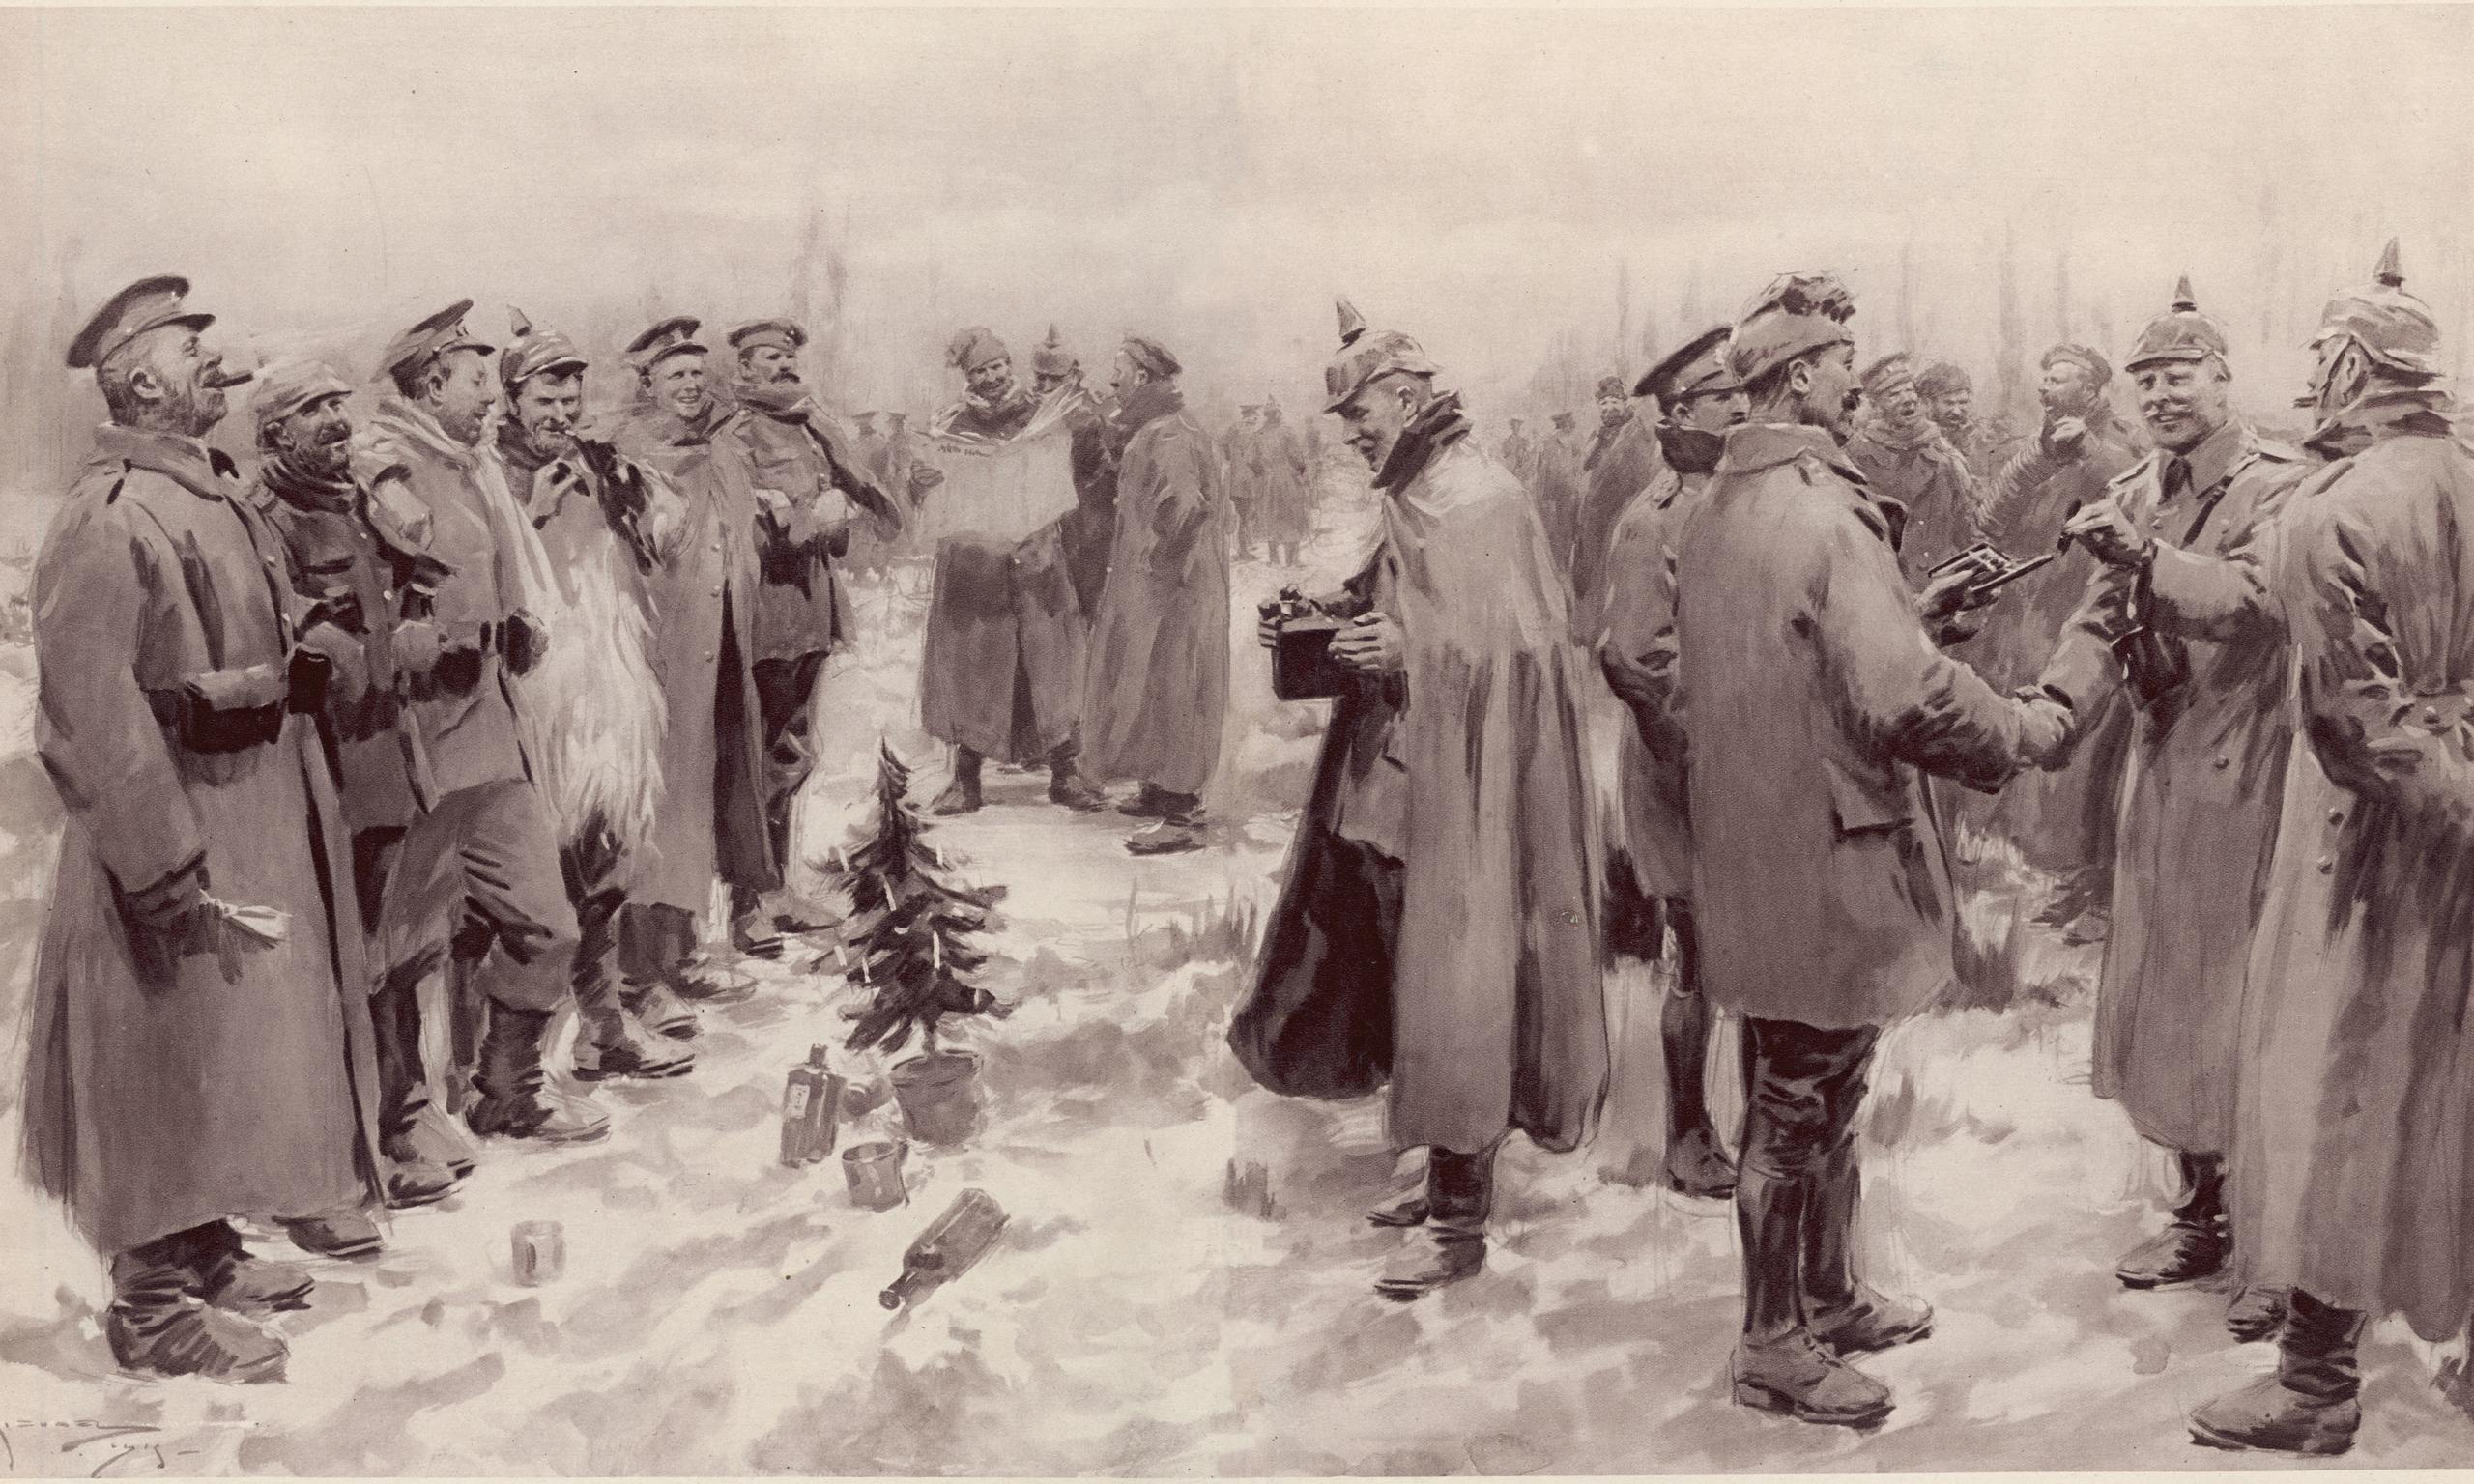 Christmas day 1914. The truce on the WW1 battlefields. Shows the humanity inside everyone, but they were able to wake up the next day and go straight back to war, kill the men that they’d spent a sincere day with. u/PotterWhoLock01